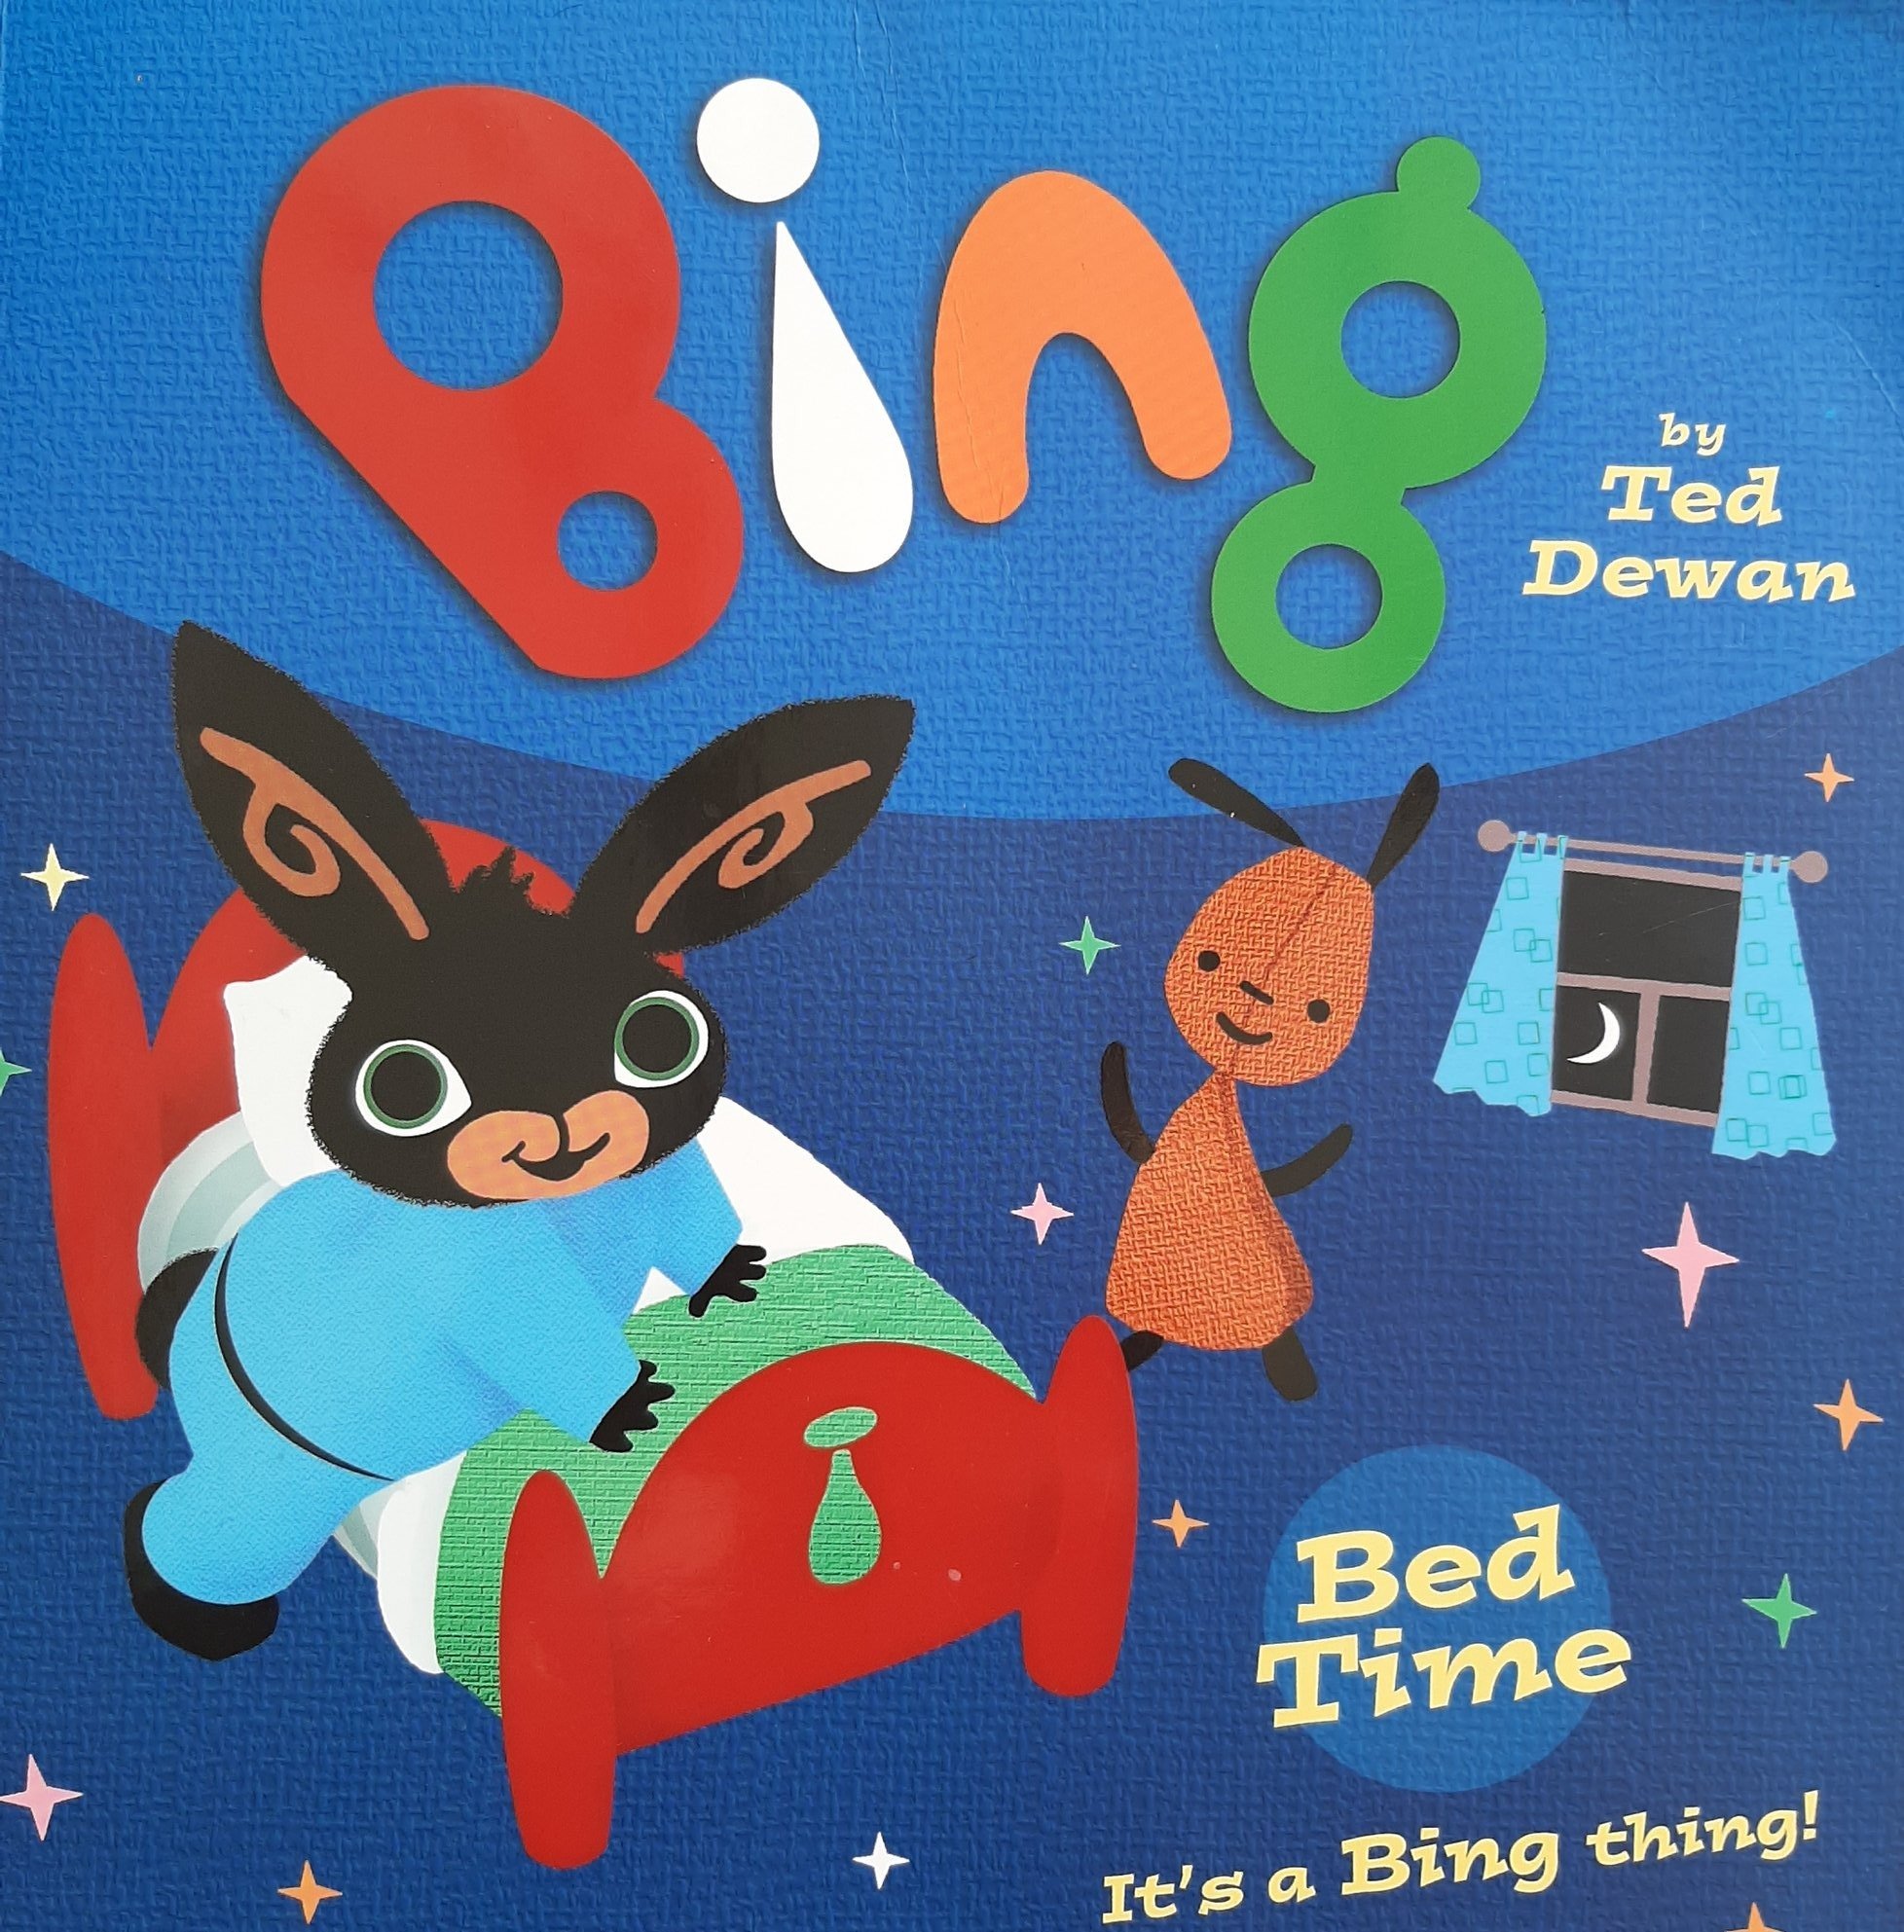 Bing - Bed Time by Ted Dewan - image of book cover